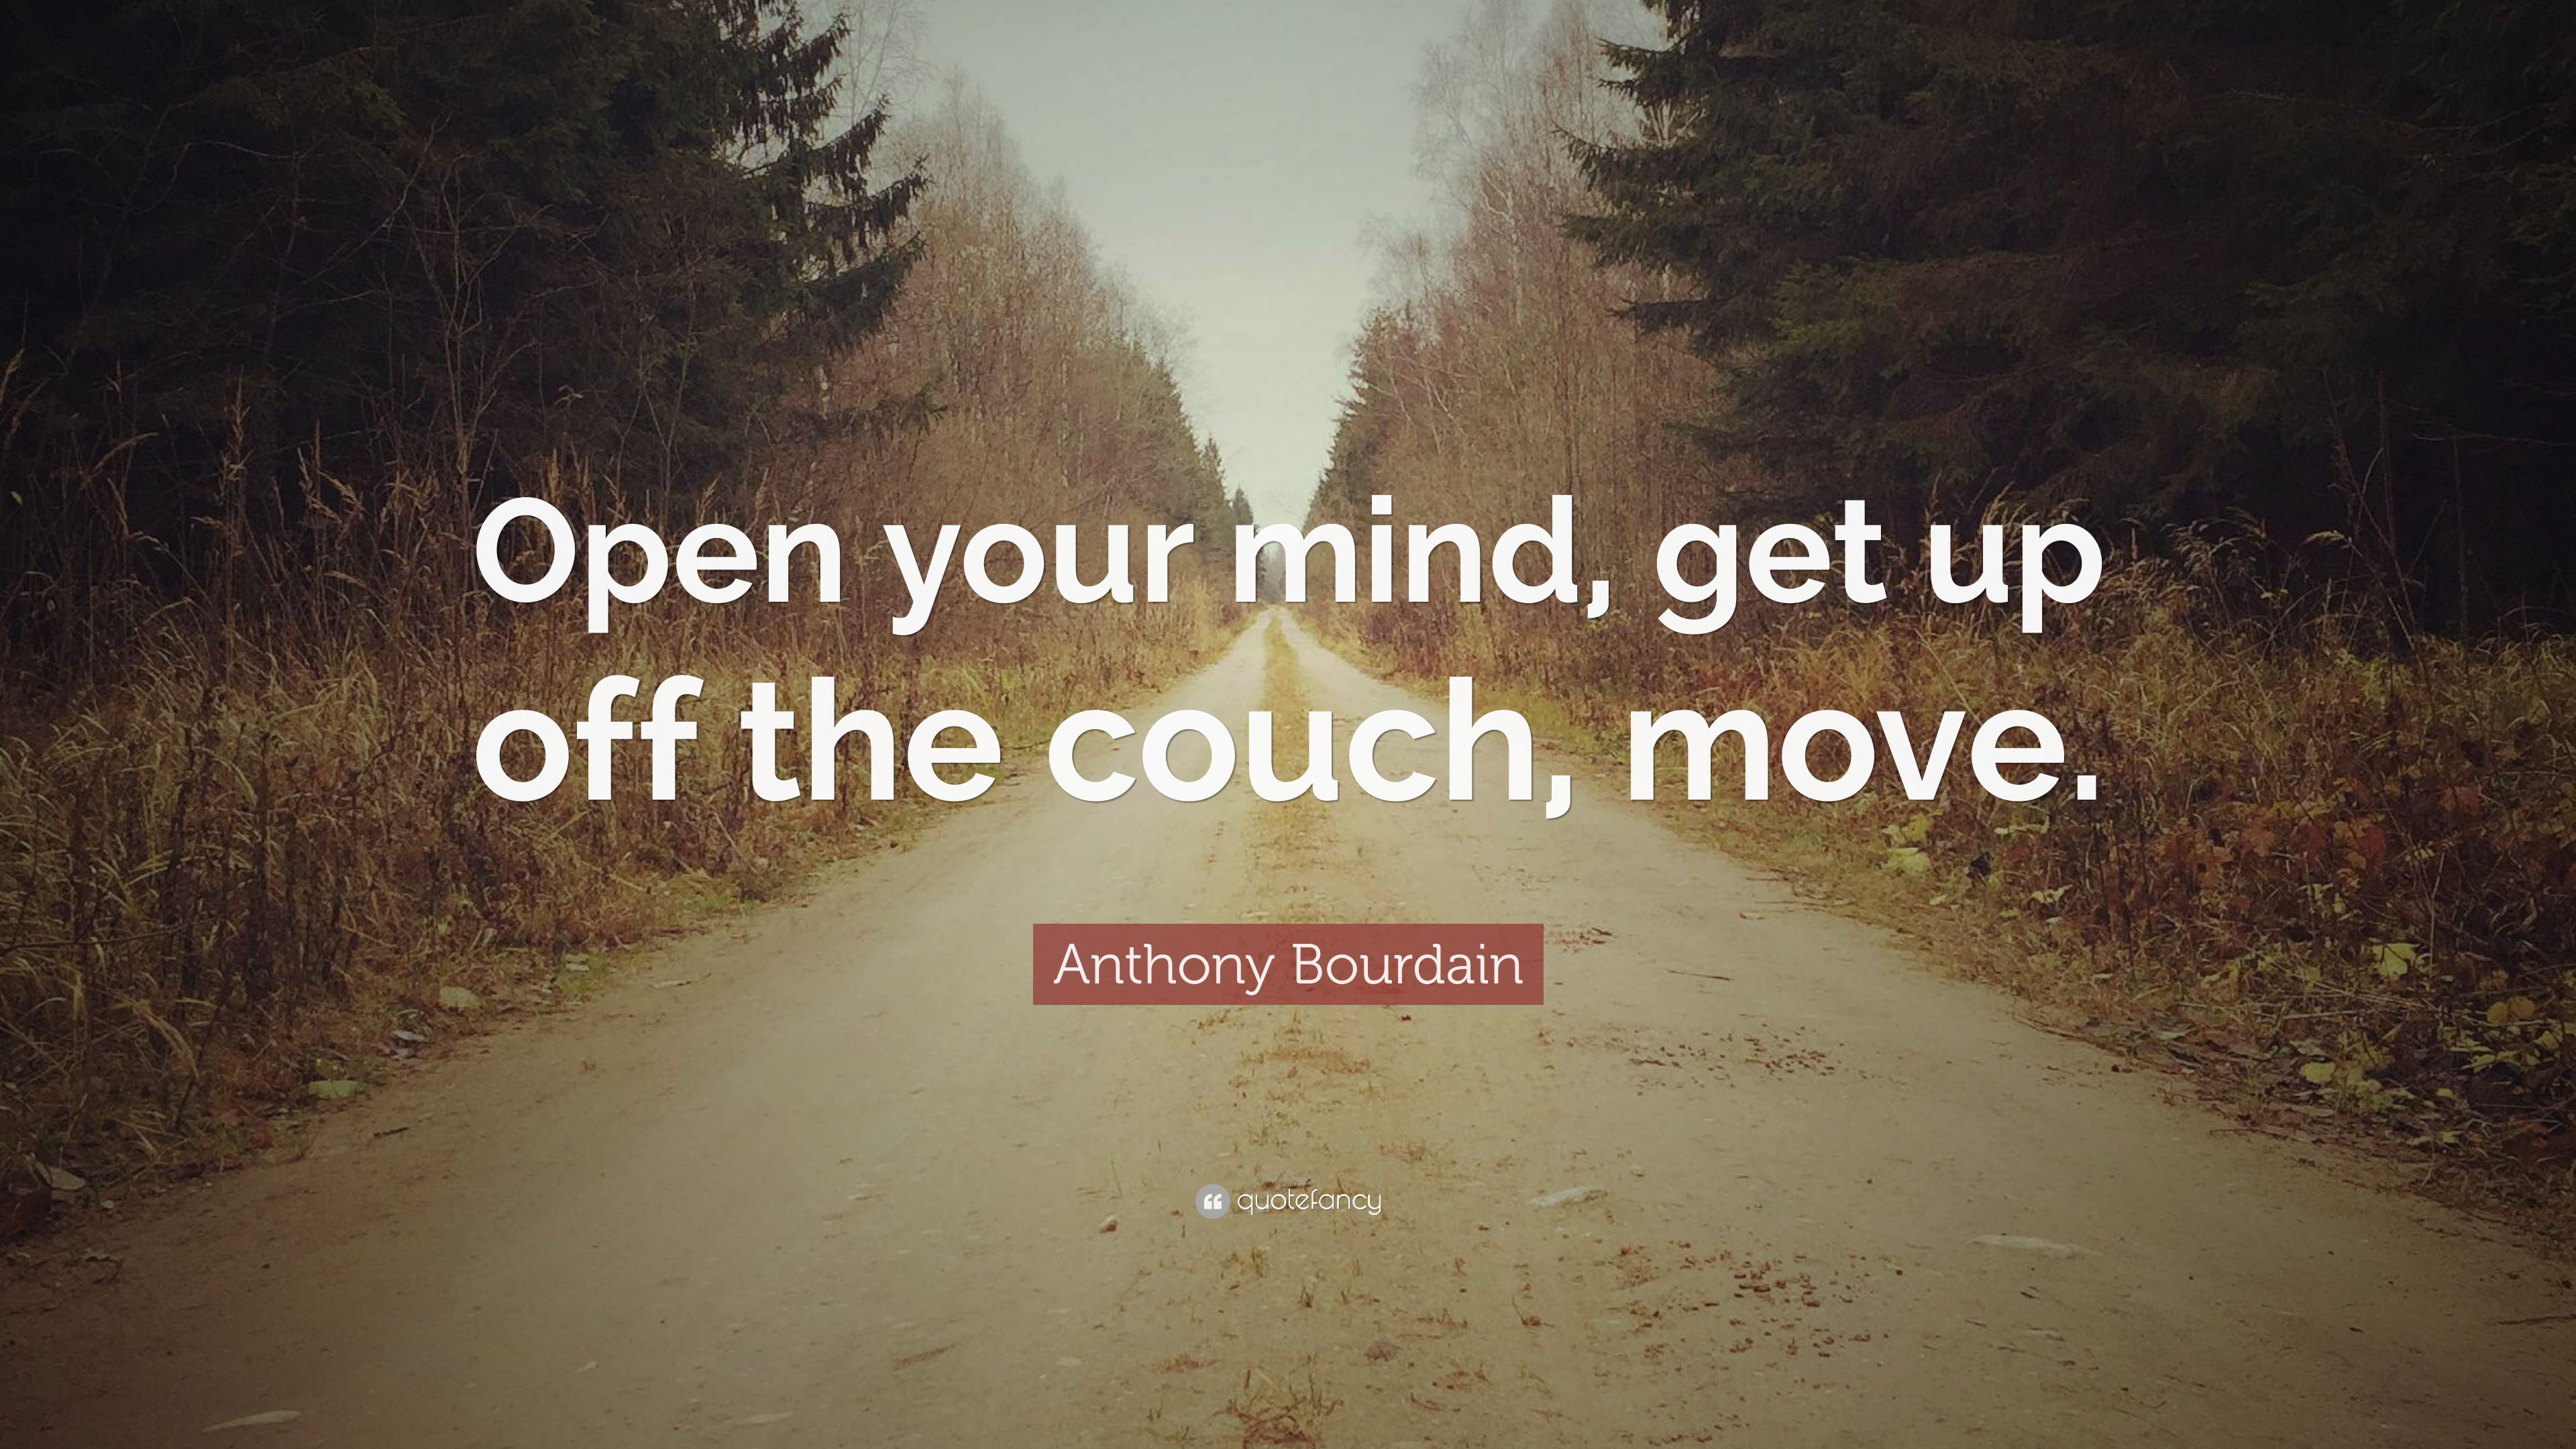 Anthony Bourdain Quote: “Open your mind, get up off the couch, move.”